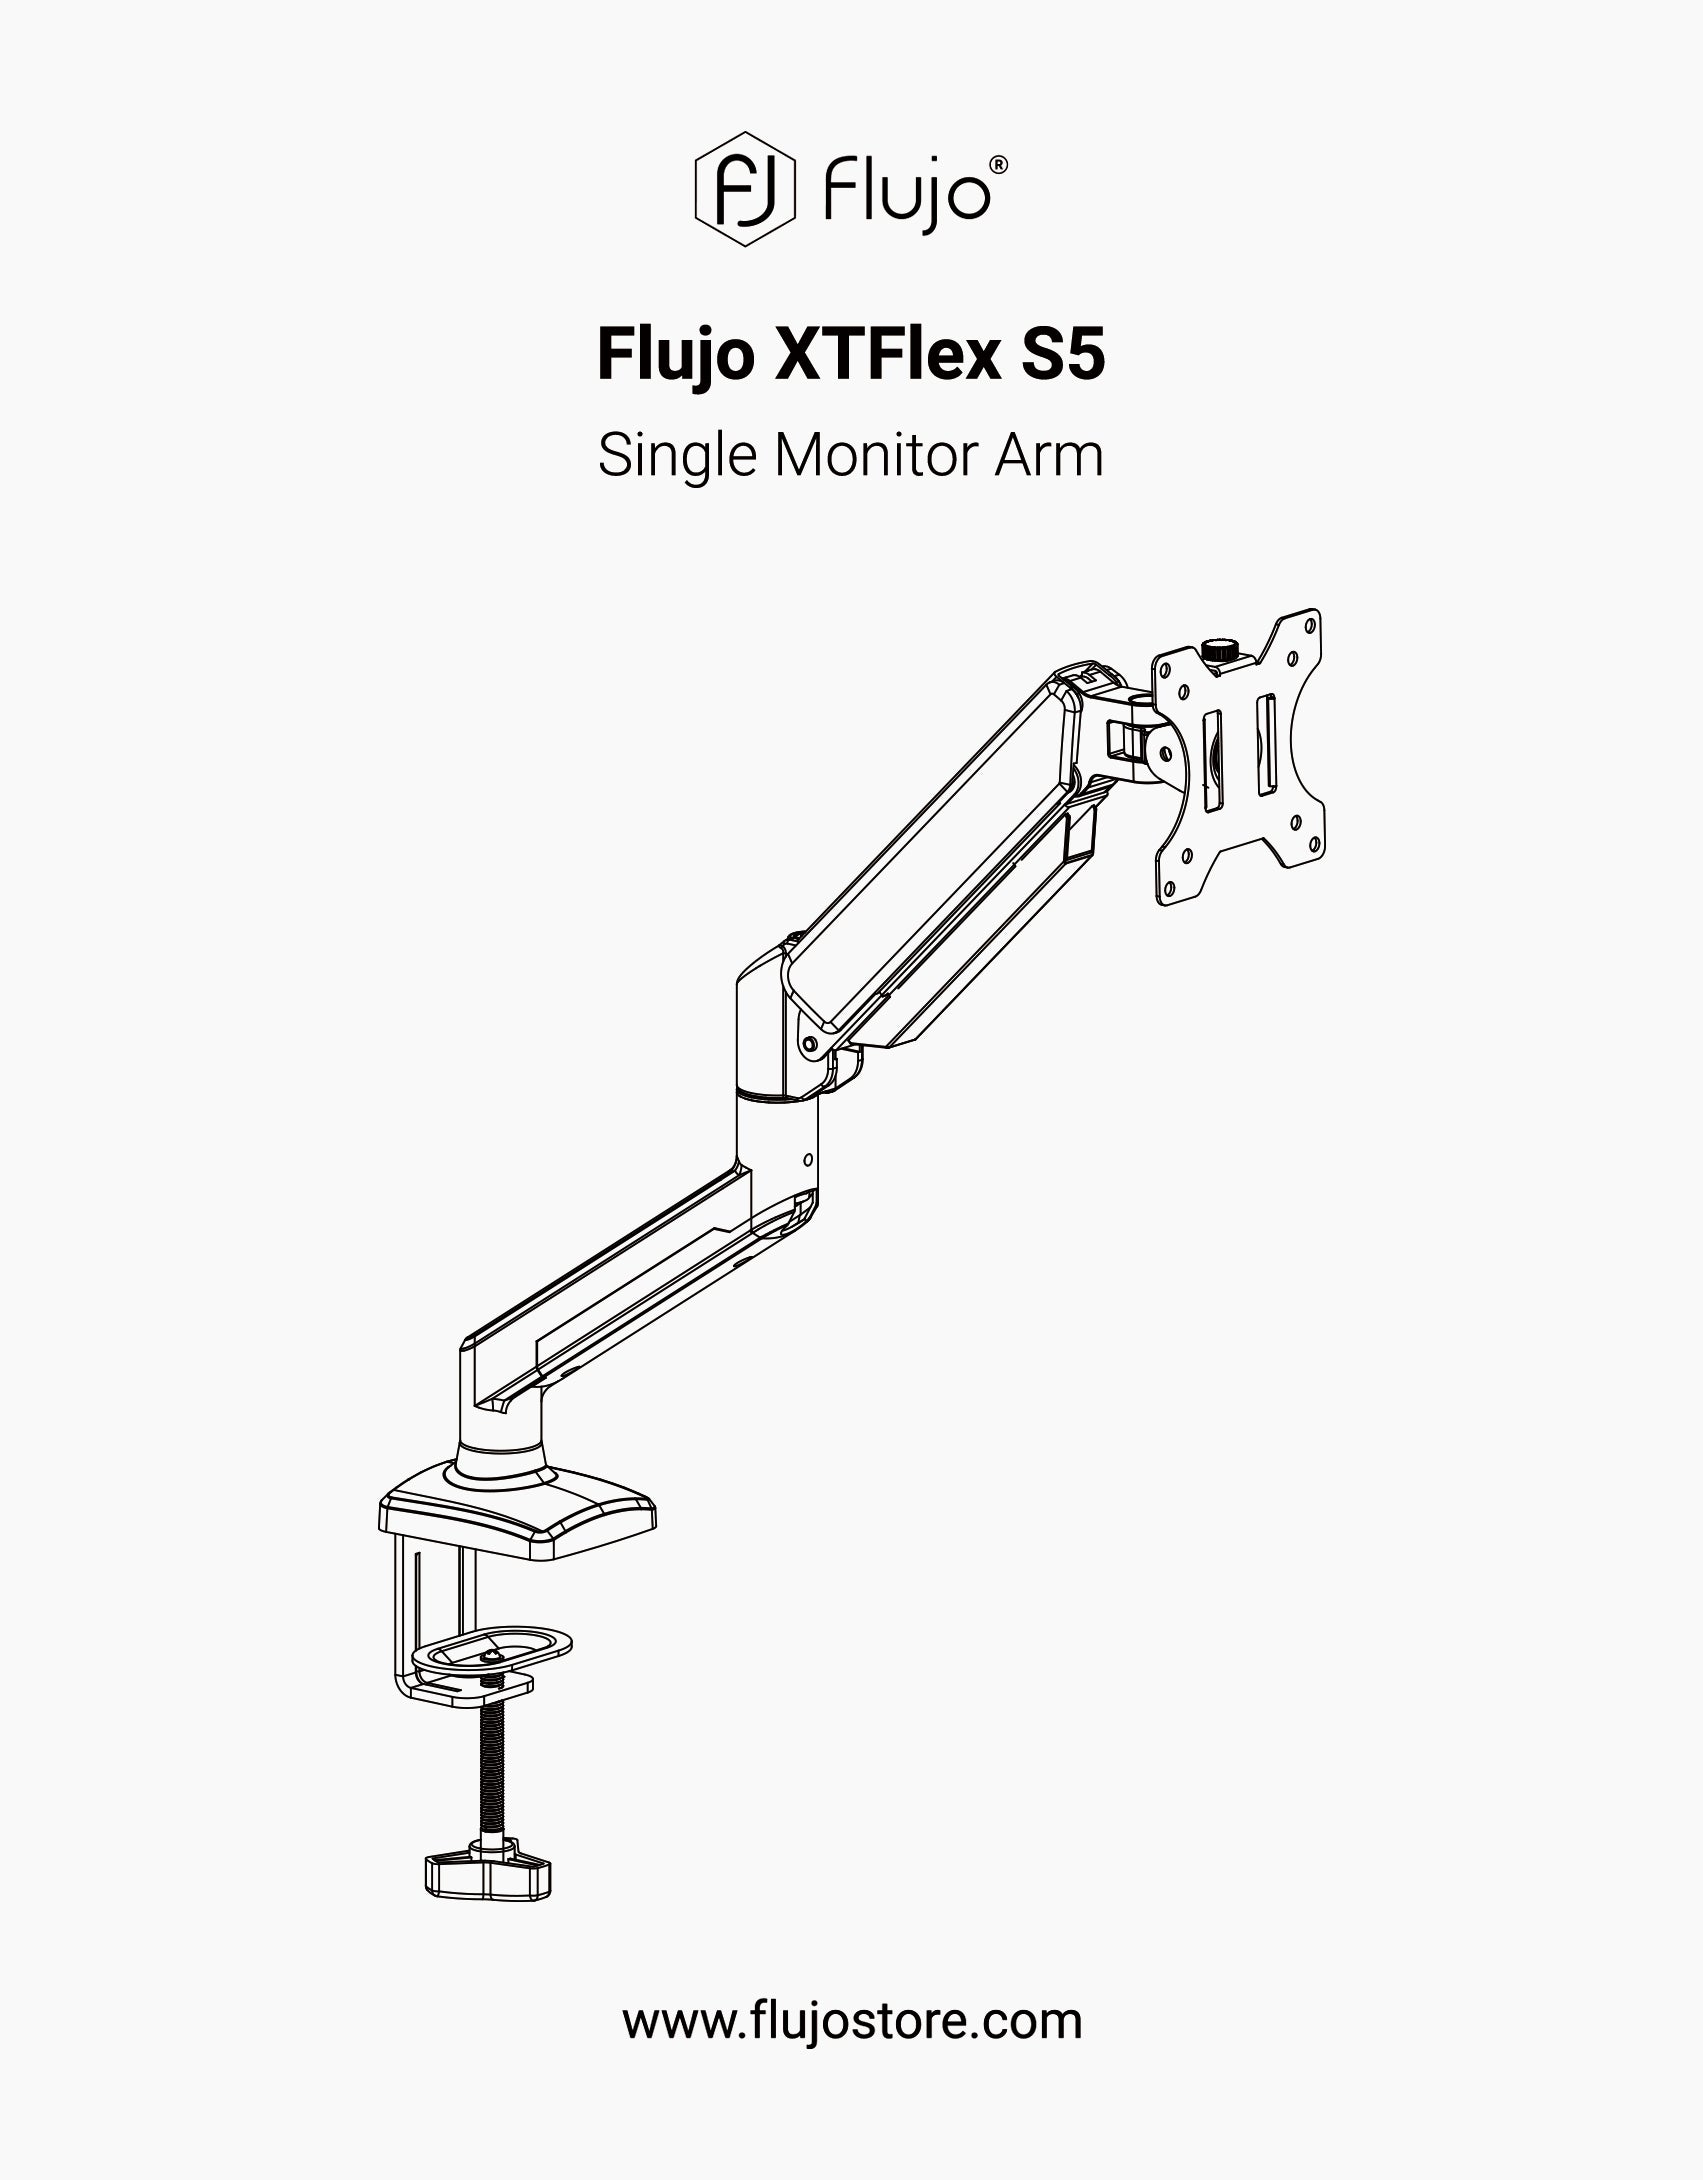 Diagram of the Flujo XTFlex S5 Single Monitor Arm, illustrating its articulated design for flexible monitor positioning, available at Flujo's website.